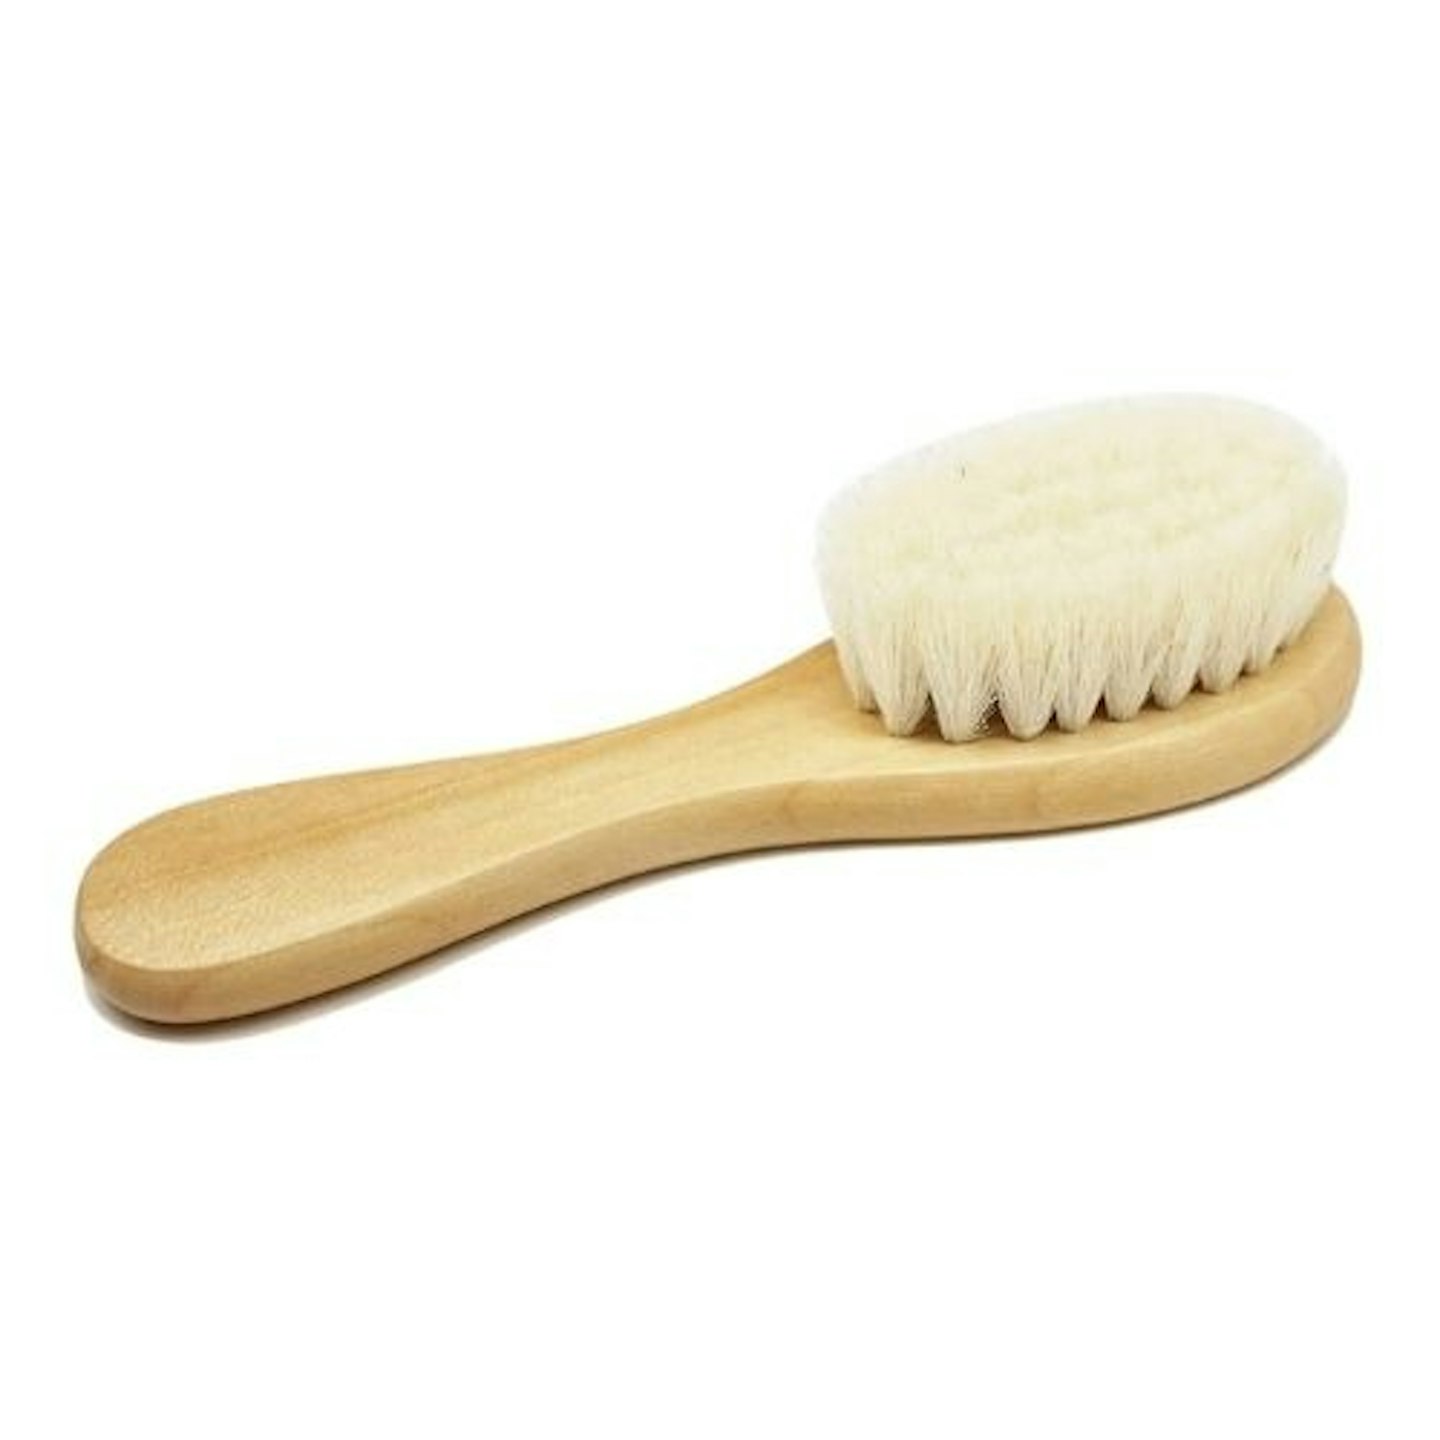  Molylove Baby Hair Brush with Wooden Handle and Super Soft Goat Bristles for Newborns & Toddlers